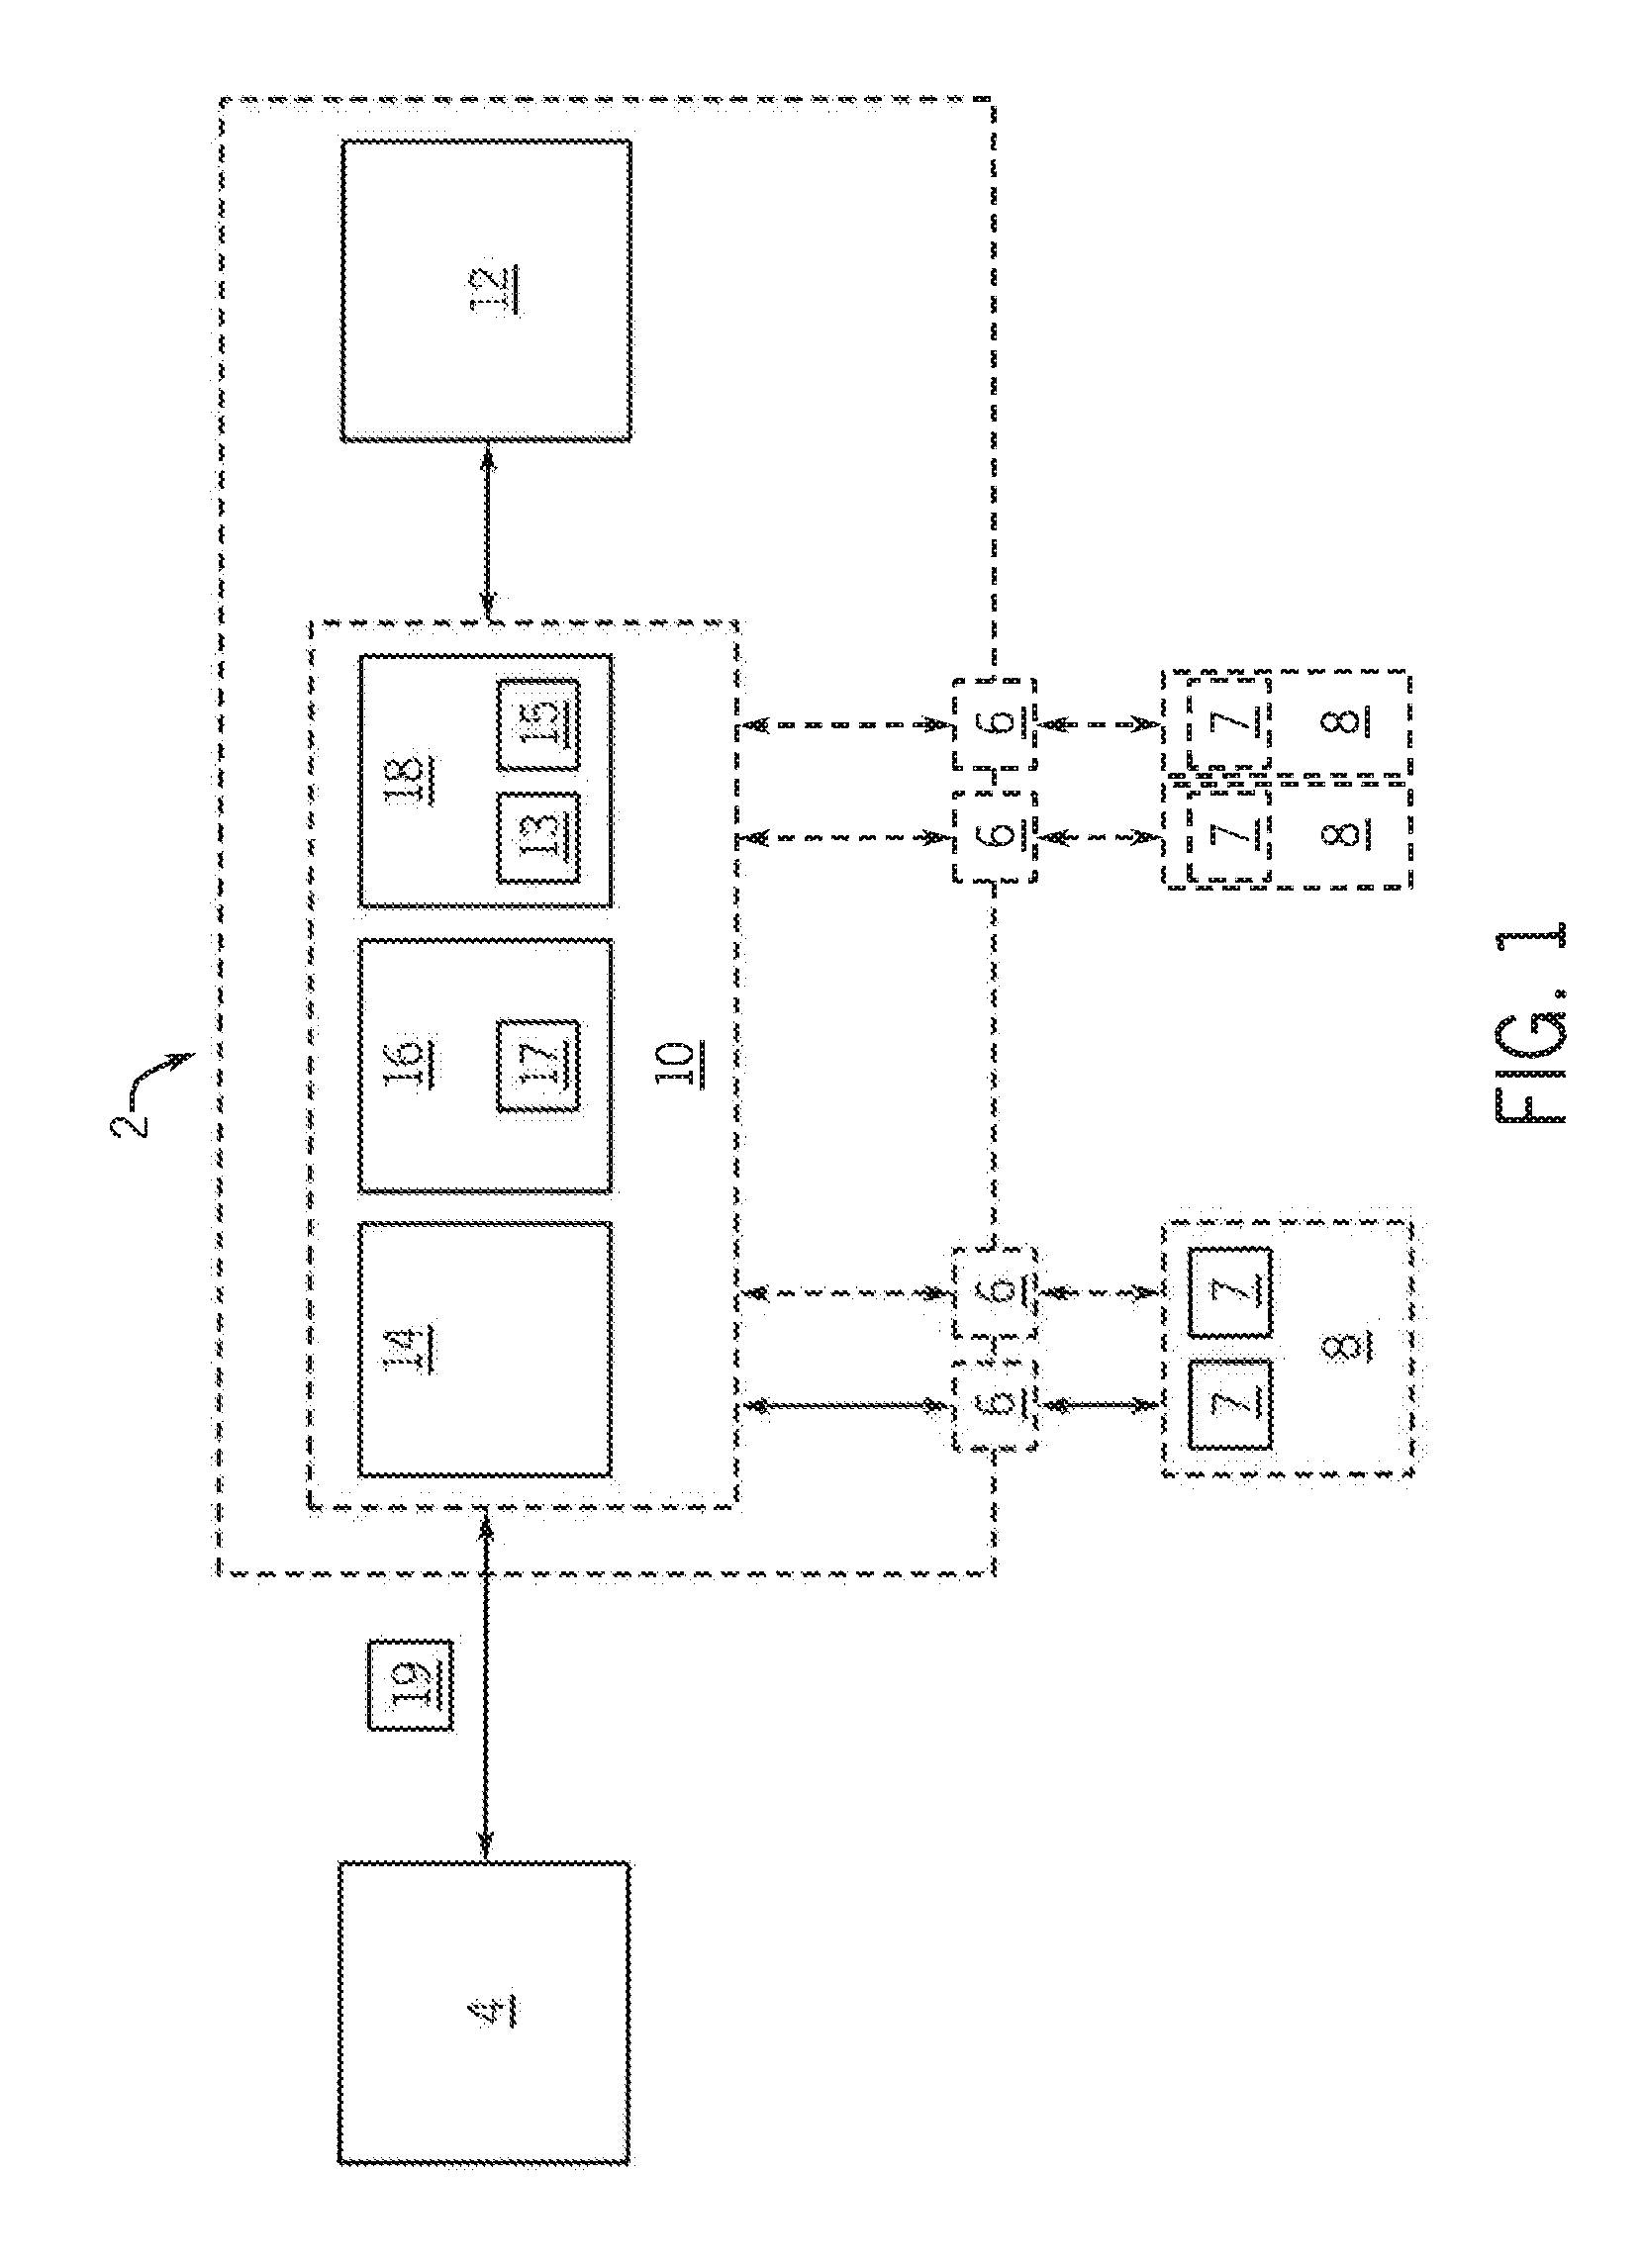 Method and System for Programmable Numerical Control